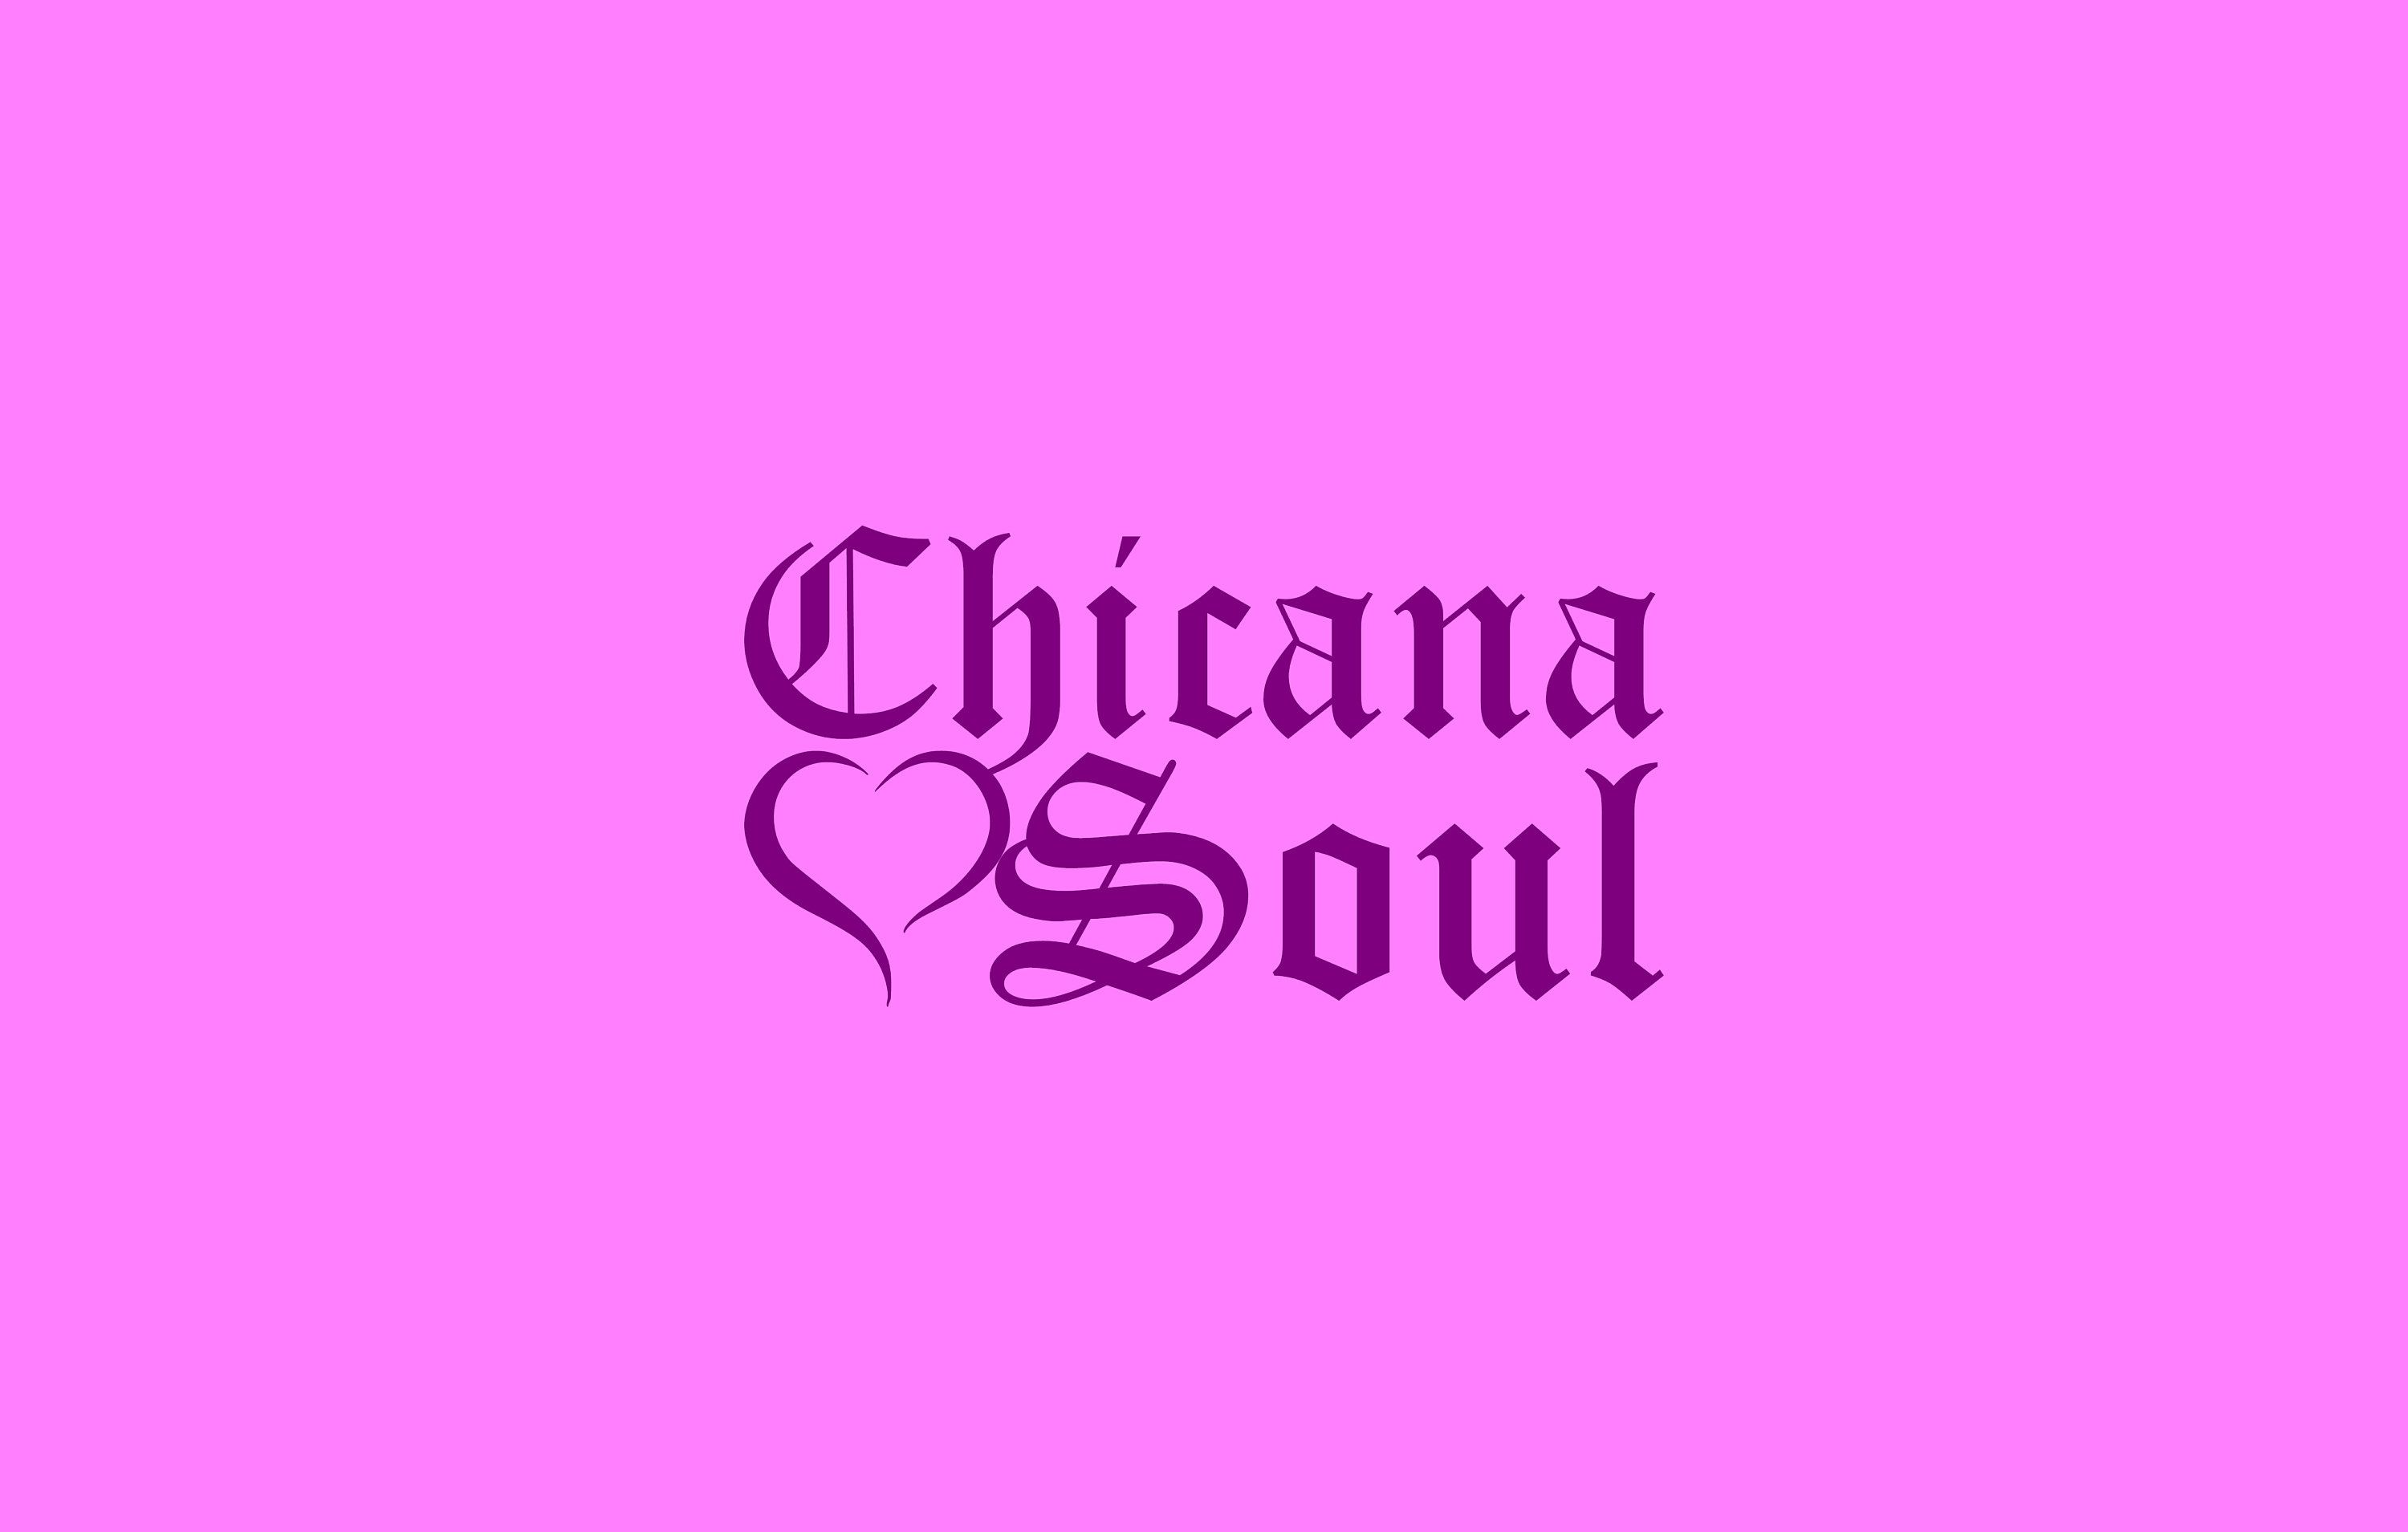 Chicana Soul With Heart. Chicana